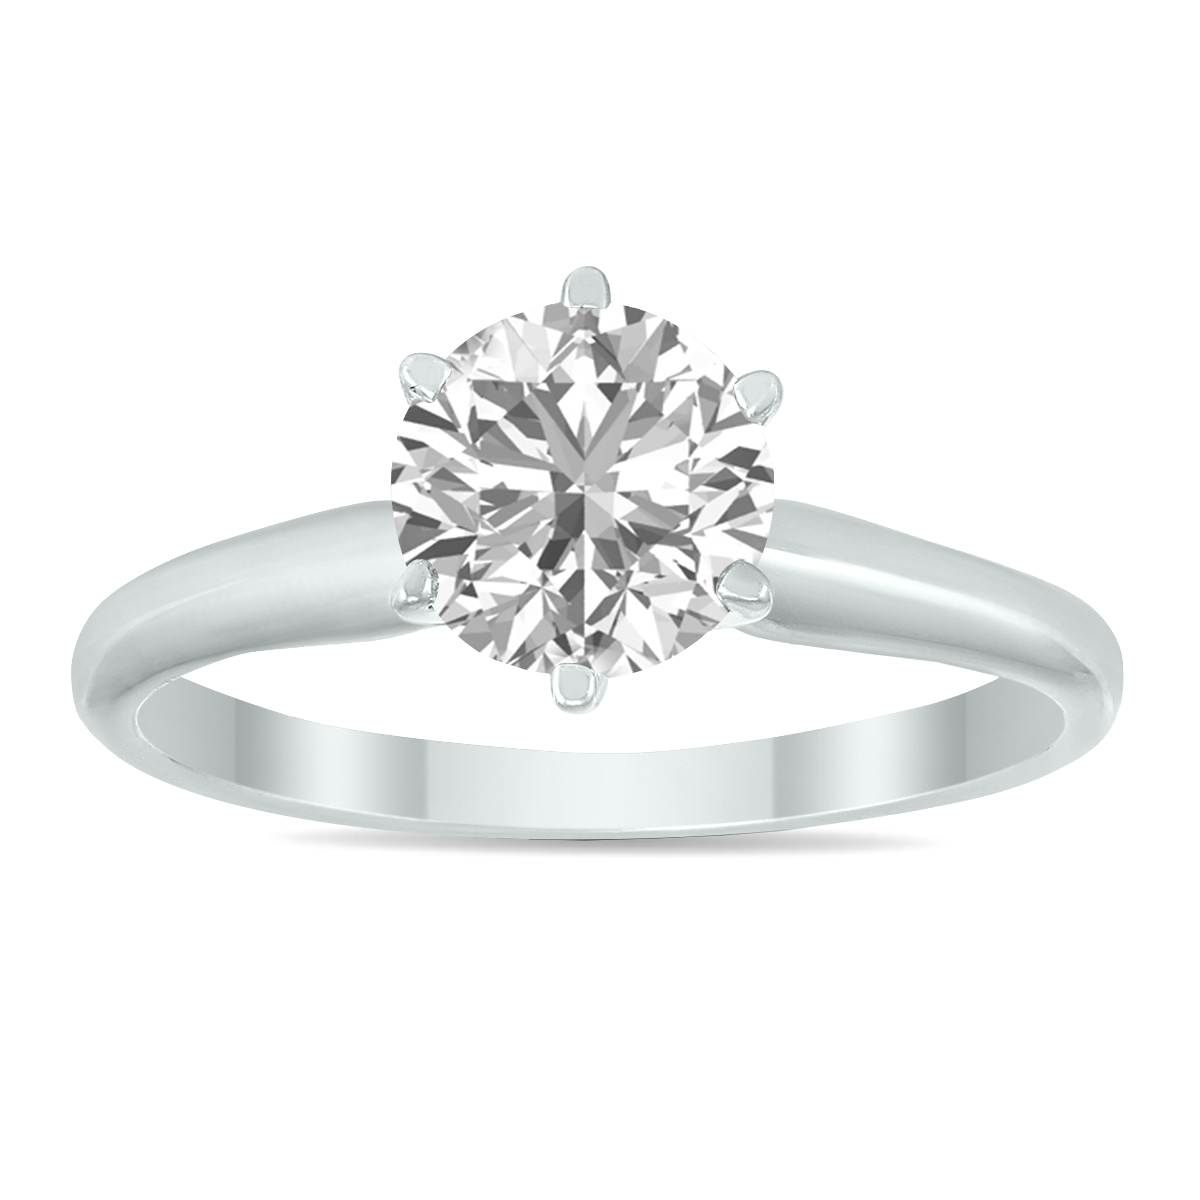 Image of IGI Certified Lab Grown 1 Carat Diamond Solitaire Ring in 14K White Gold (I Color VS2 Clarity)